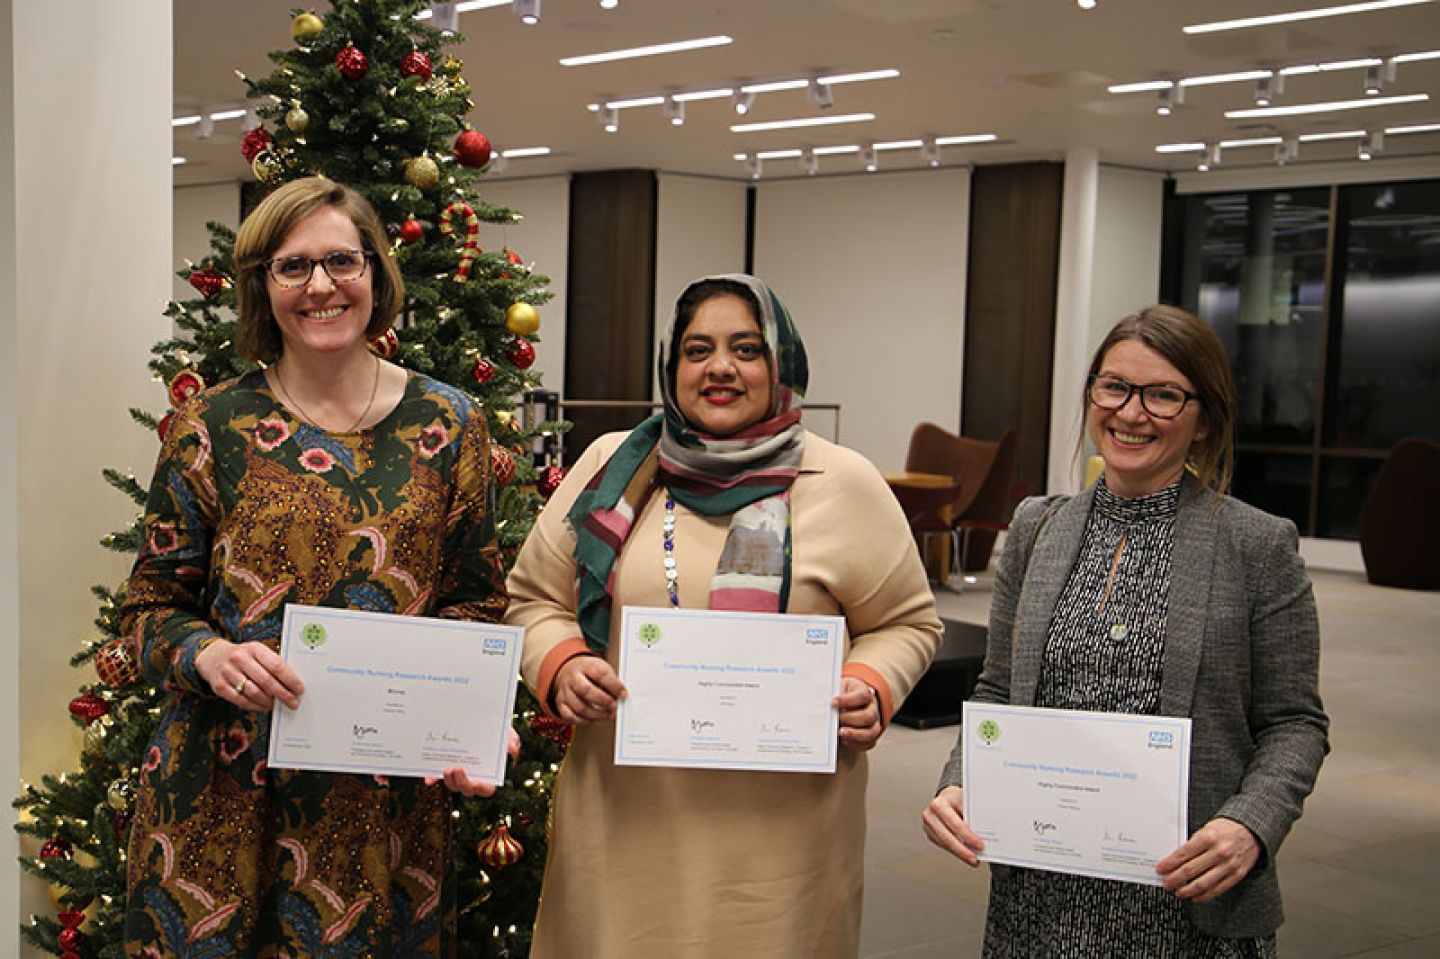 Community Nursing Research Award winner, Eleanor Willis (left), with Highly Commended Award winners, Alis Rasul (centre) and Rowan Waring (right).